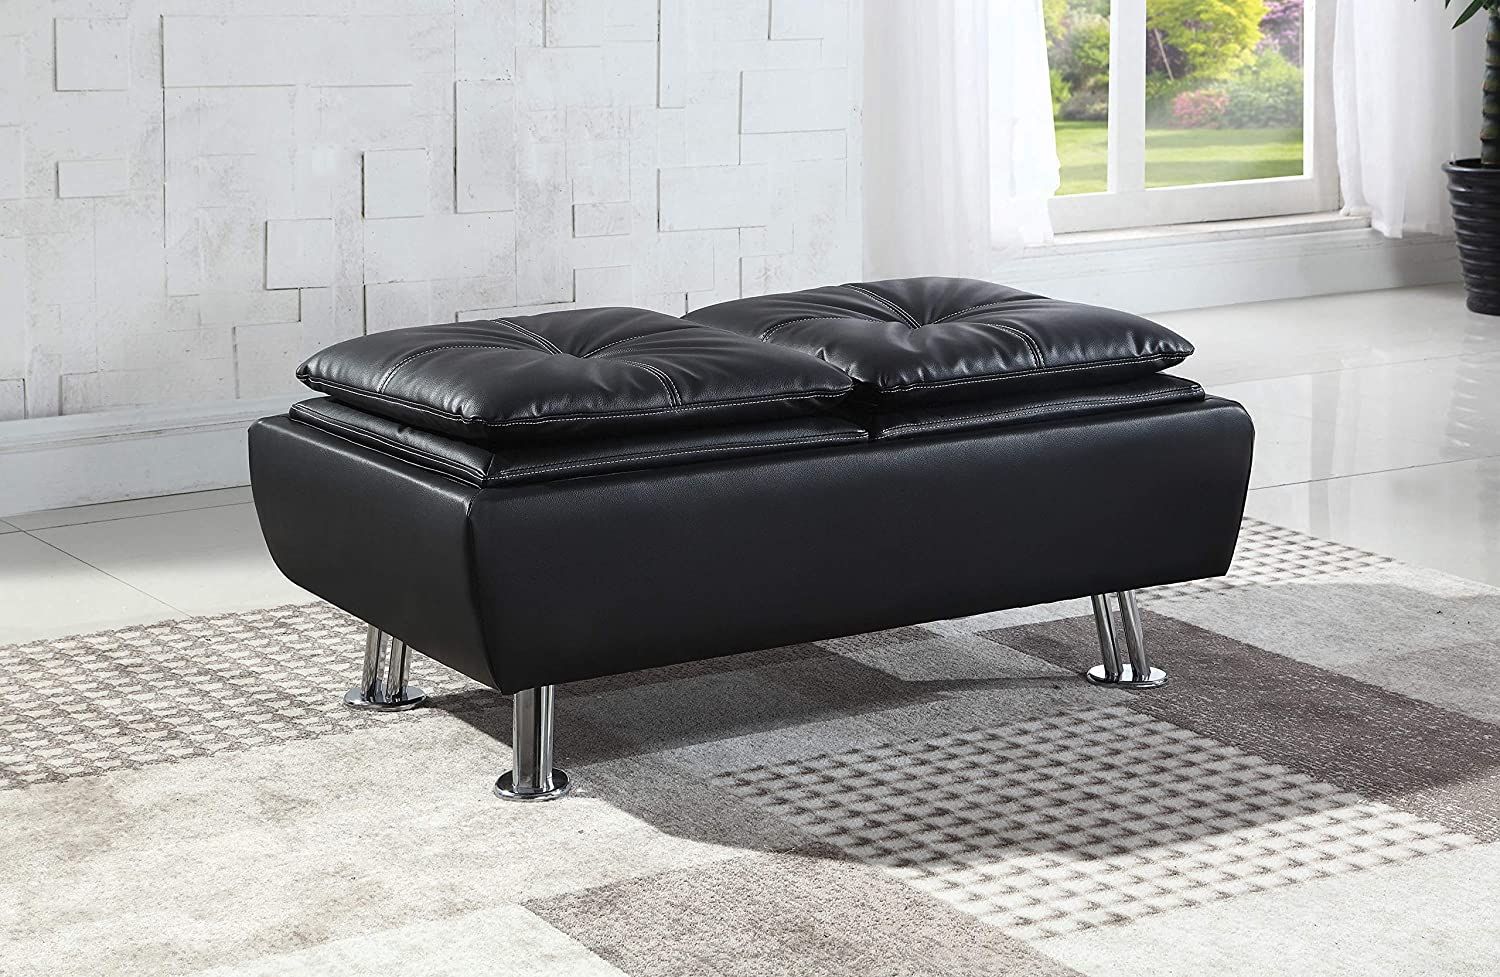 Rafael Faux Leather Storage Ottoman With Reversible Tray Tops Black,  7445043665640 | Ebay Throughout Ottomans With Stool And Reversible Tray (View 13 of 15)